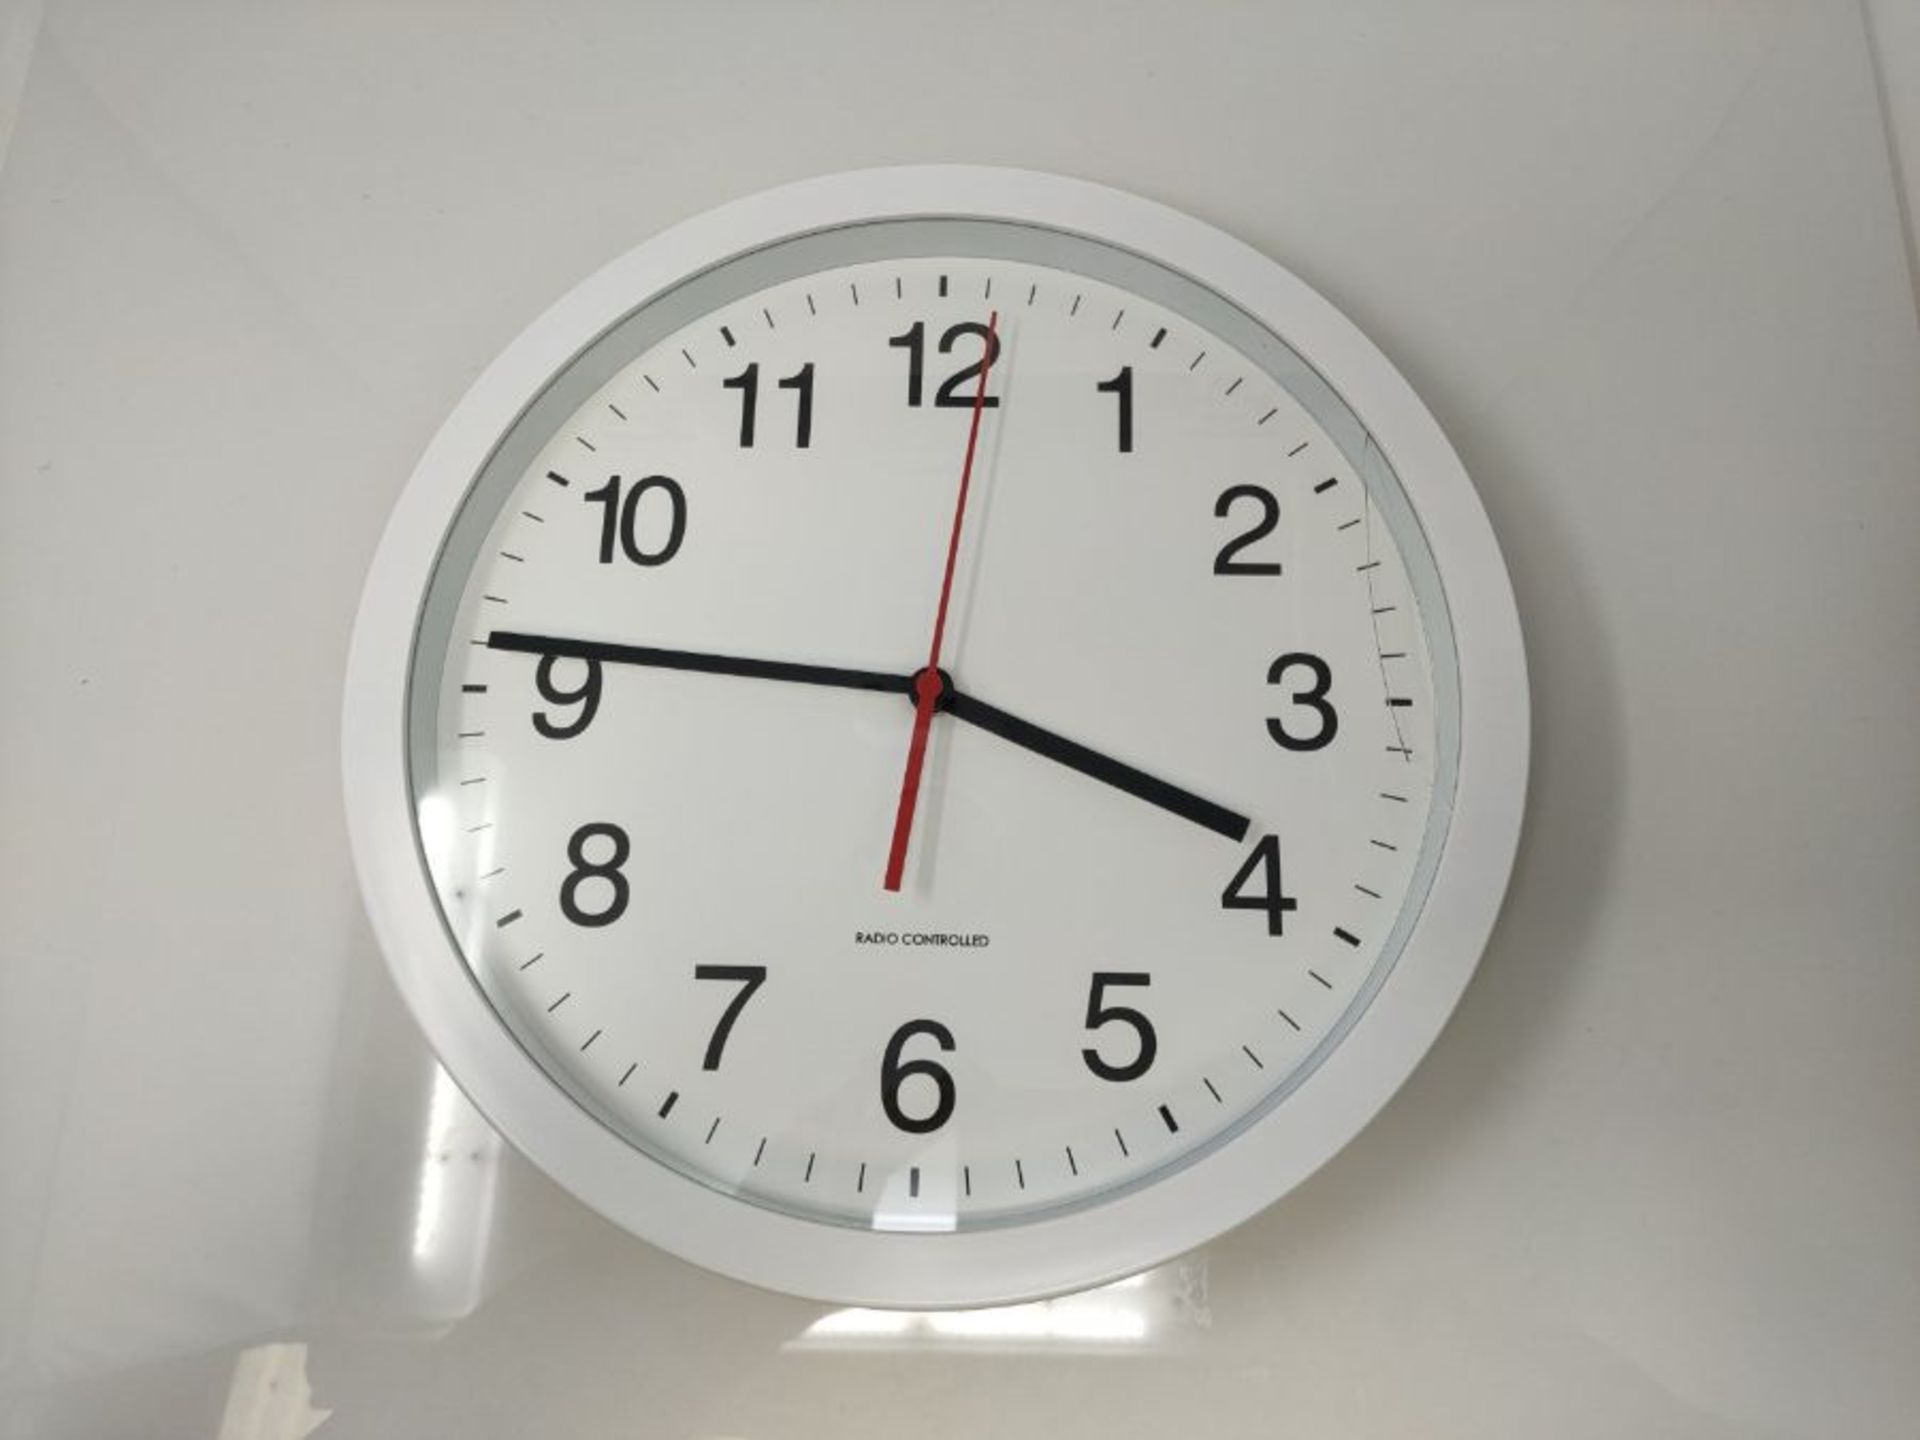 [CRACKED] Argos Home Radio Controlled Wall Clock - Image 2 of 2